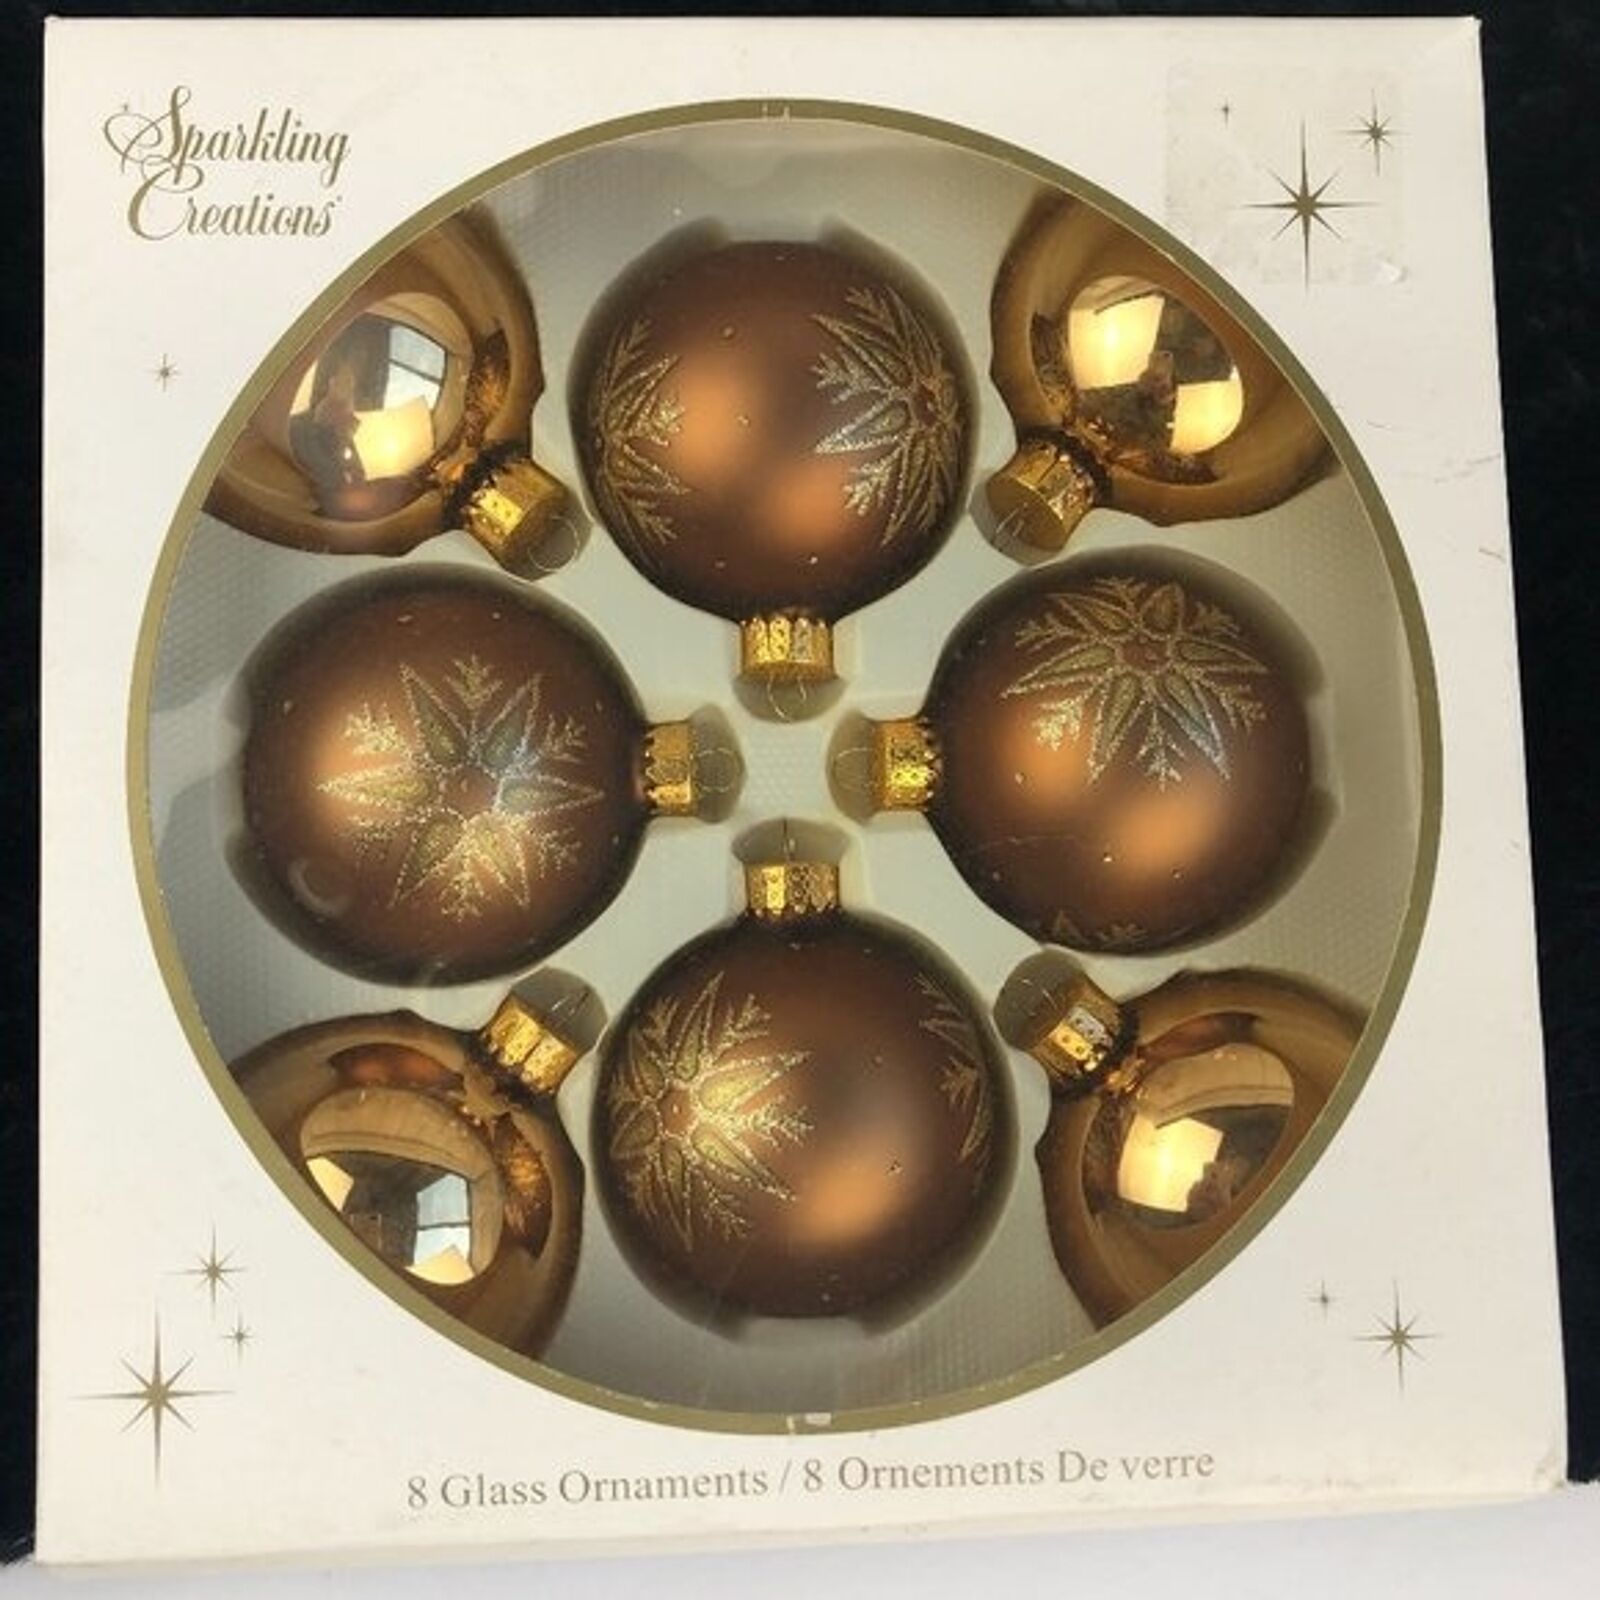 Vintage Sparkling Creations 8 Glass Christmas Ornaments - NEW Collectible